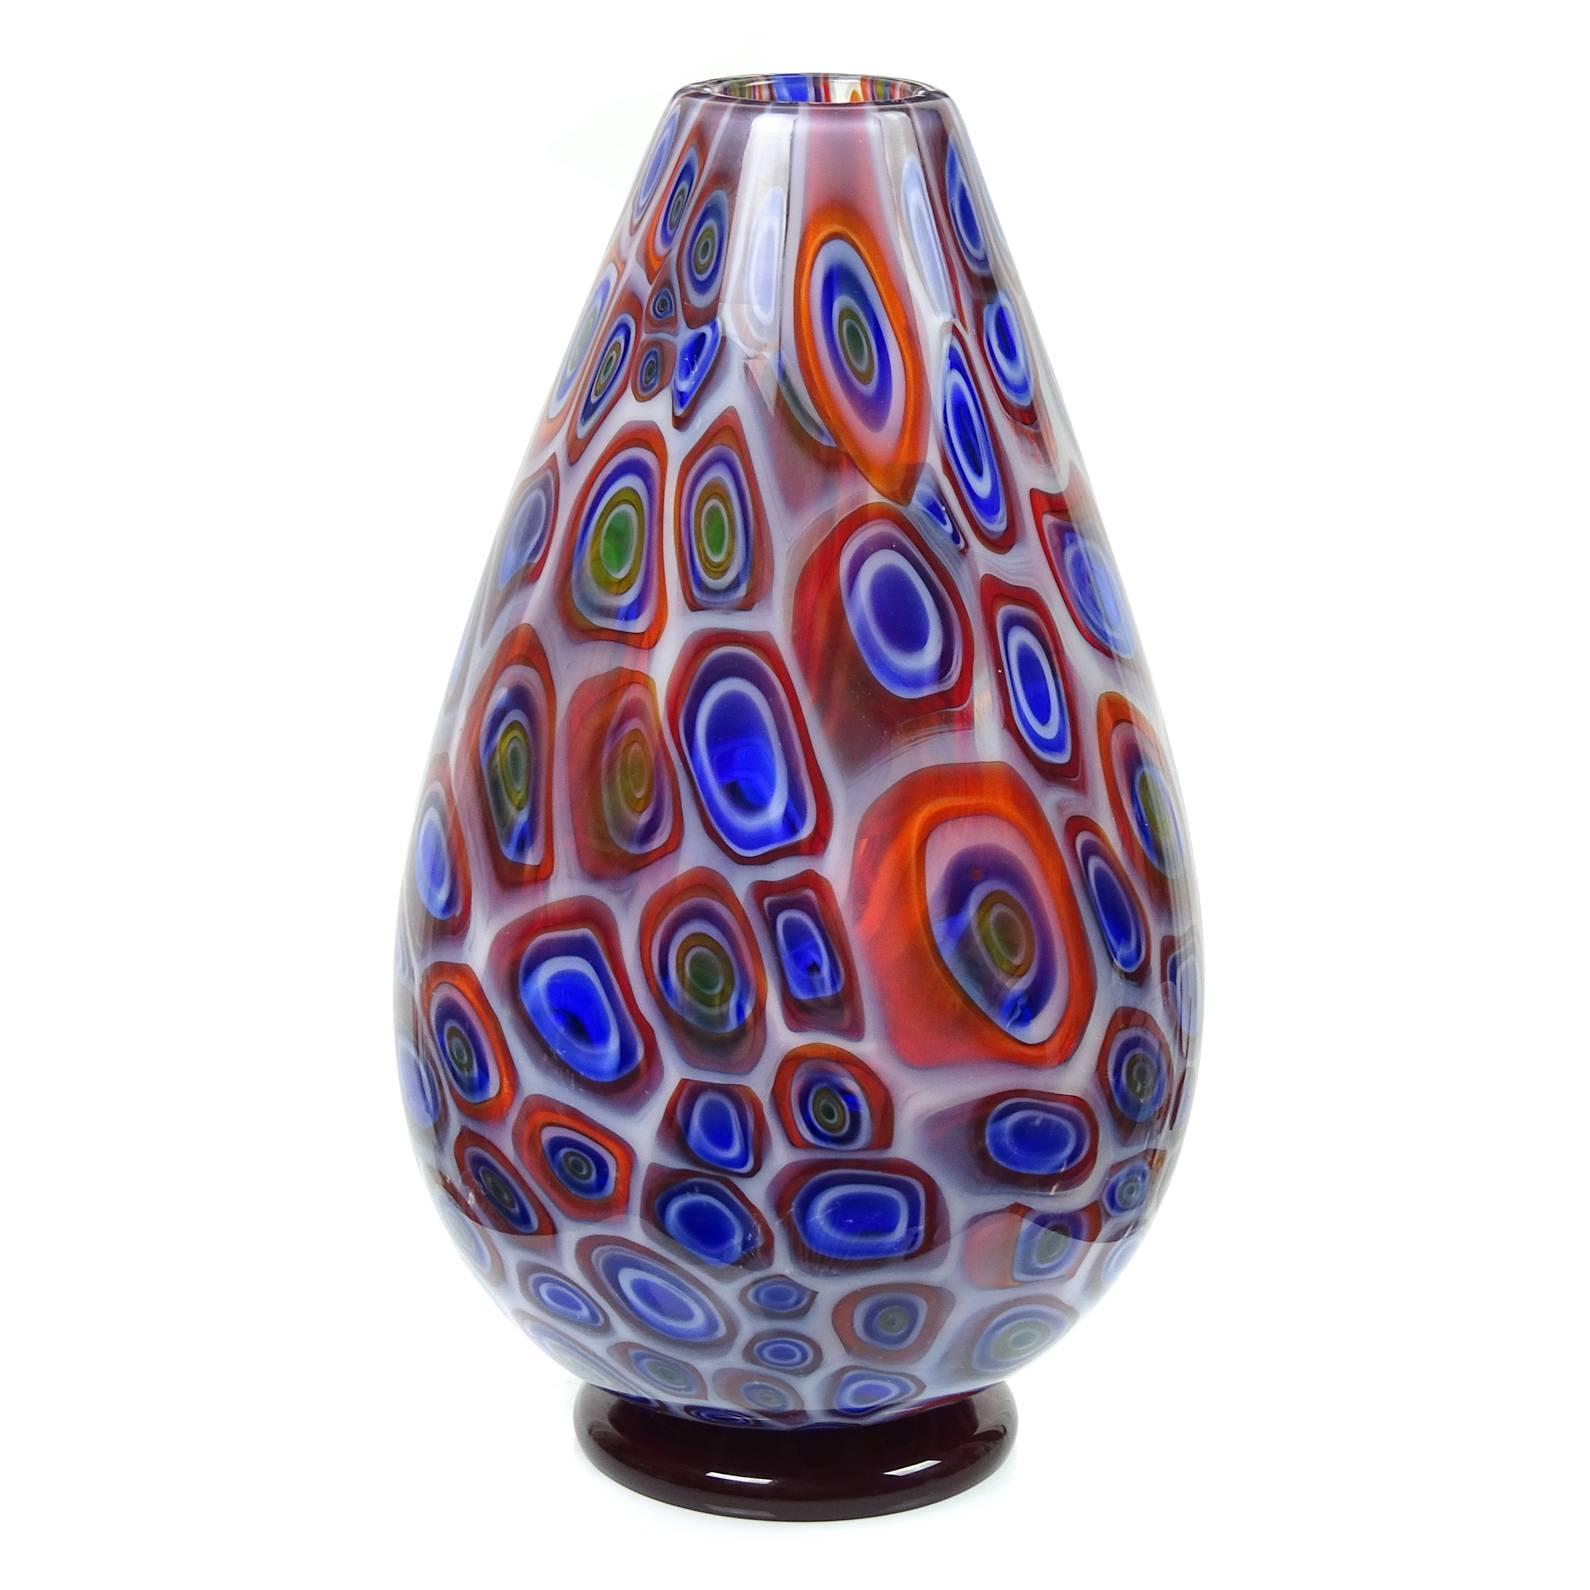 Very large Murano hand blown opalescent white, red, blue and orange "bullseye" murrines Italian art glass vase. The piece is signed Vistosi underneath. Stands on a red disk. The murrines are a bit subdued, but come to life once lights hit